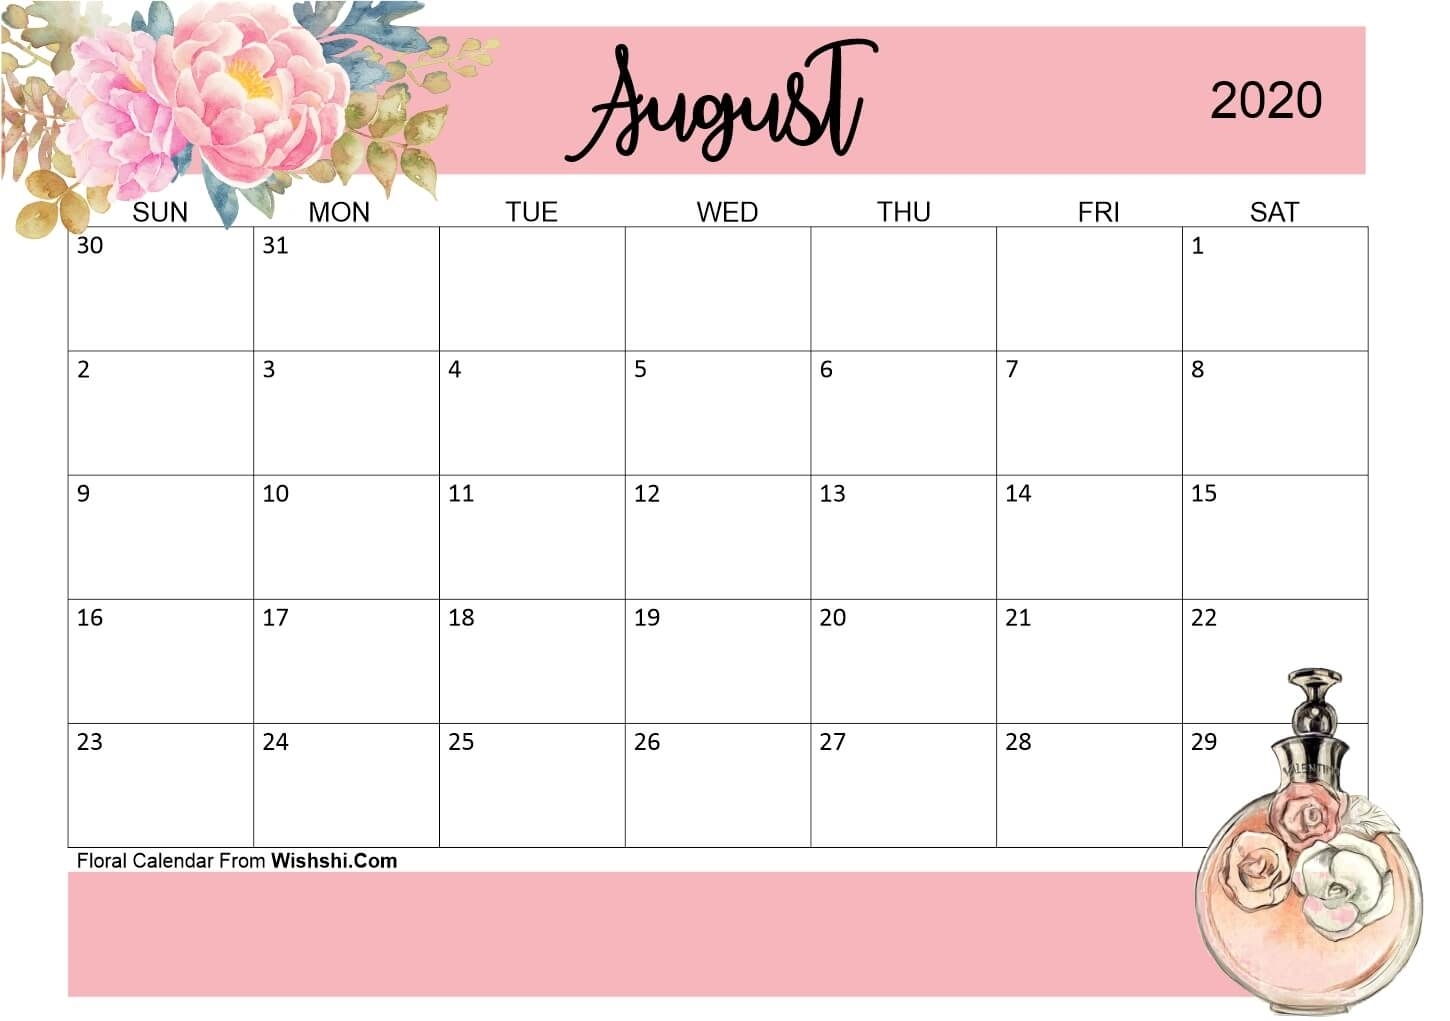 Take Pretty Calender For Month Of August